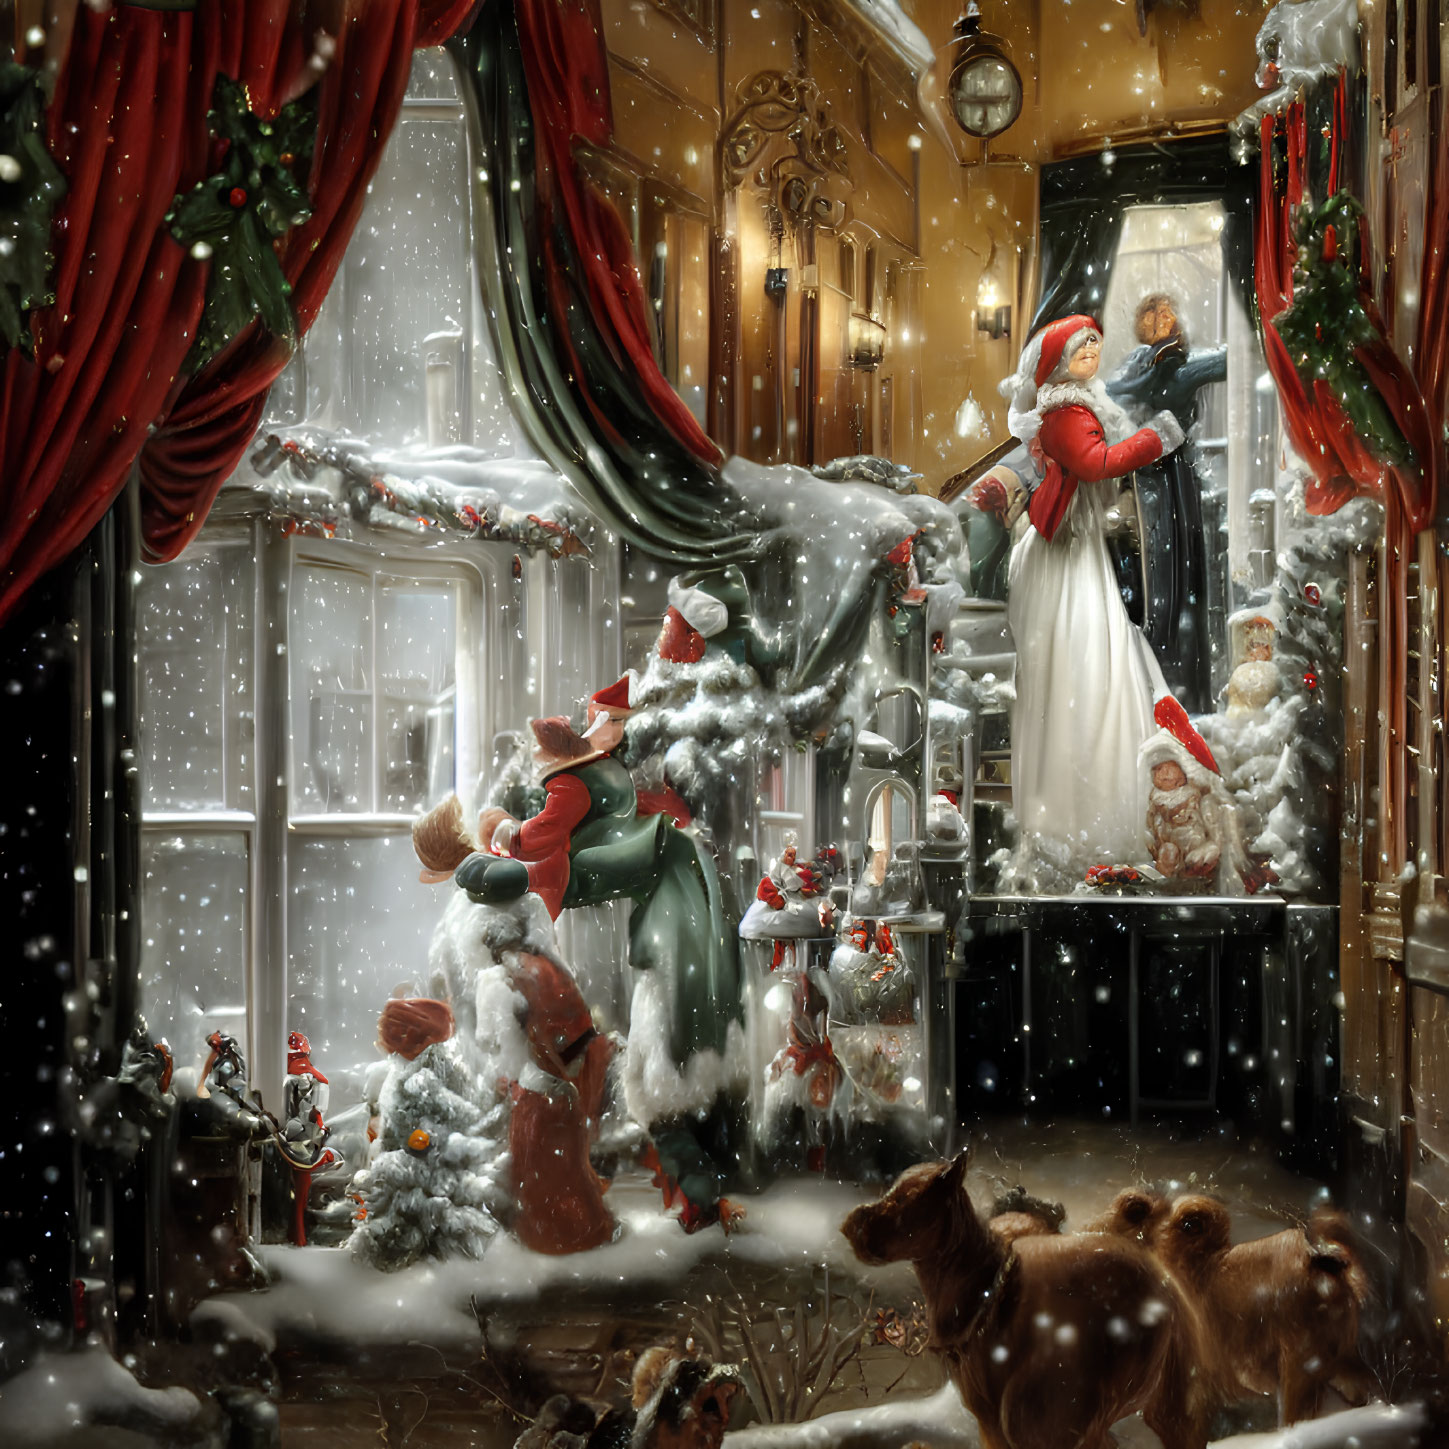 Snowy Christmas porch scene with Santa, person holding child, and happy dogs